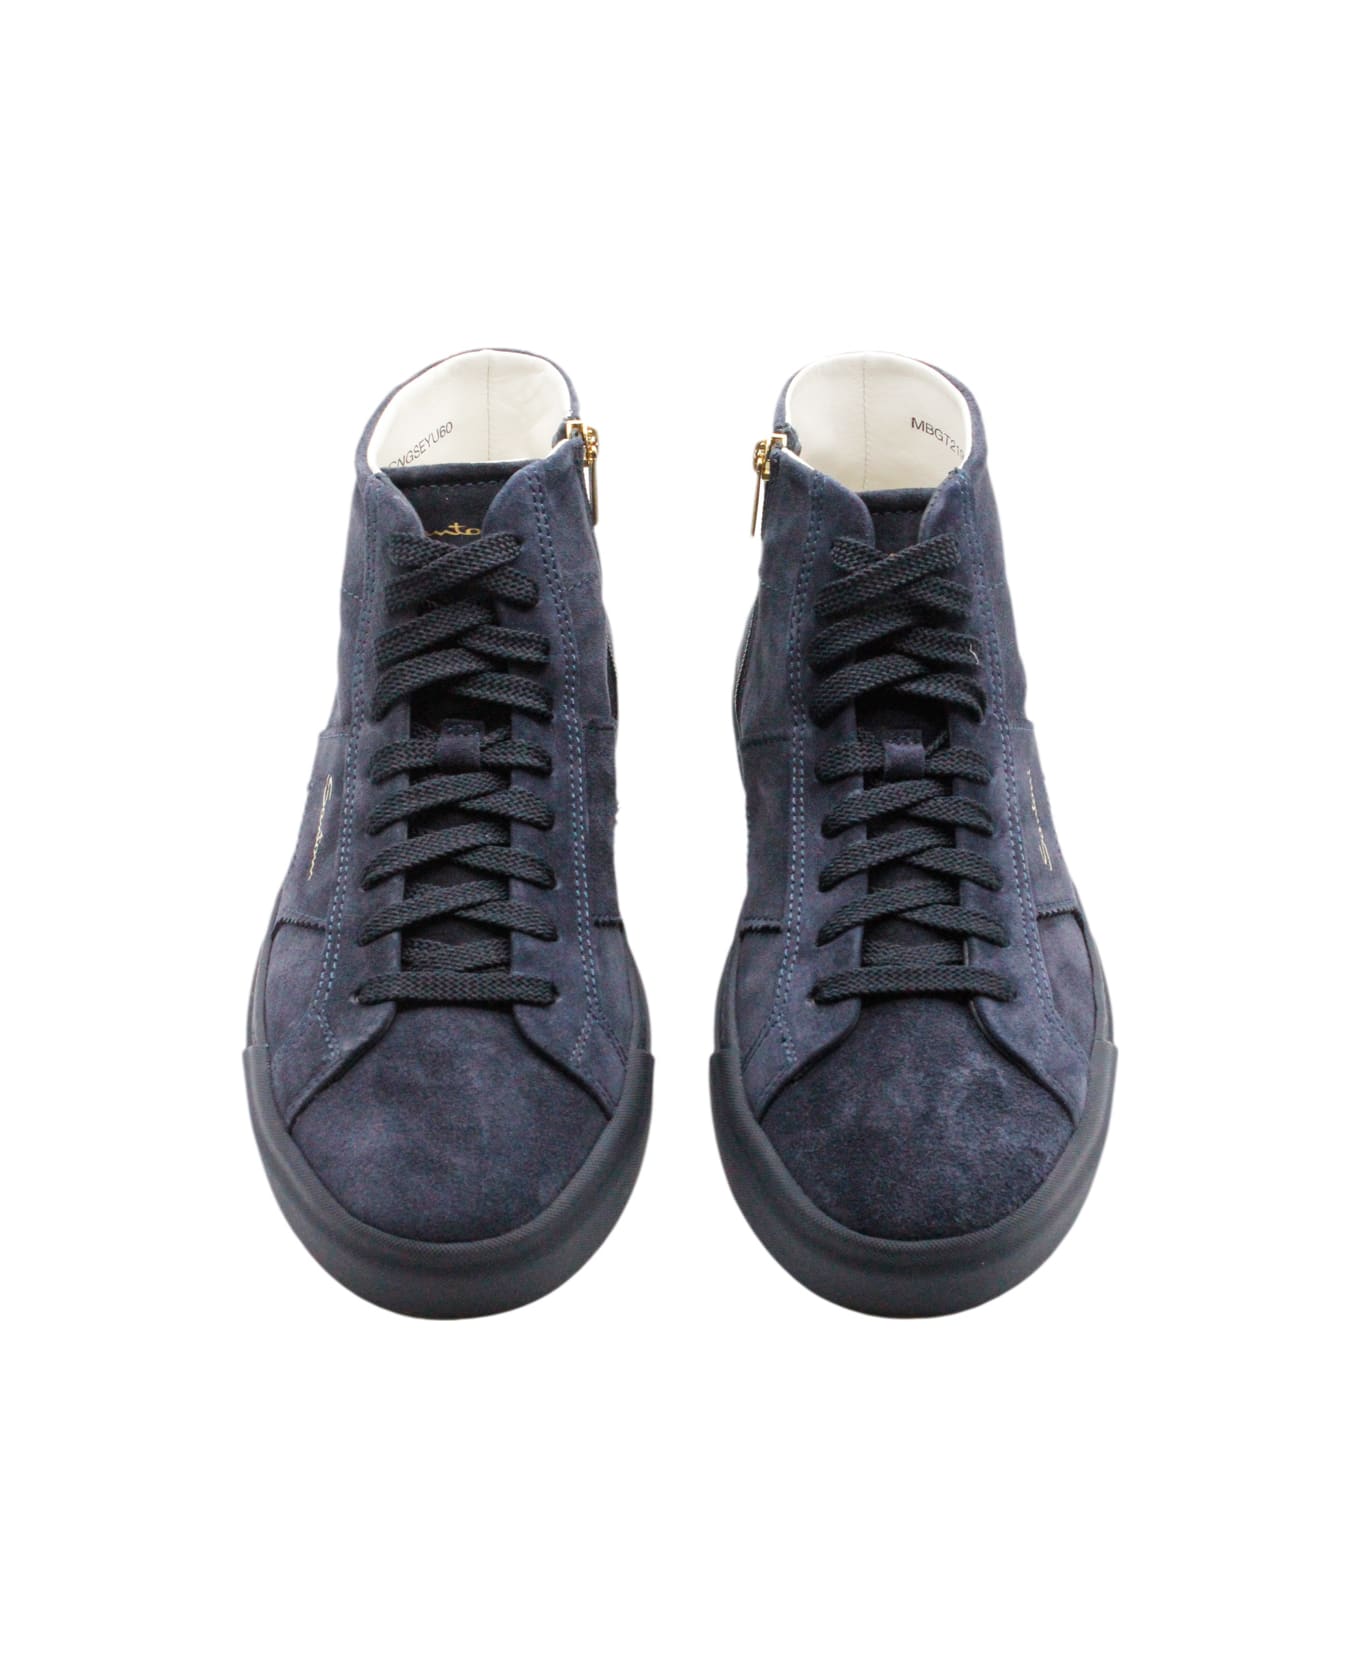 Santoni High-top Sneaker In Soft Suede Calfskin With Side Zip And Laces With Side Logo Lettering - Blu スニーカー